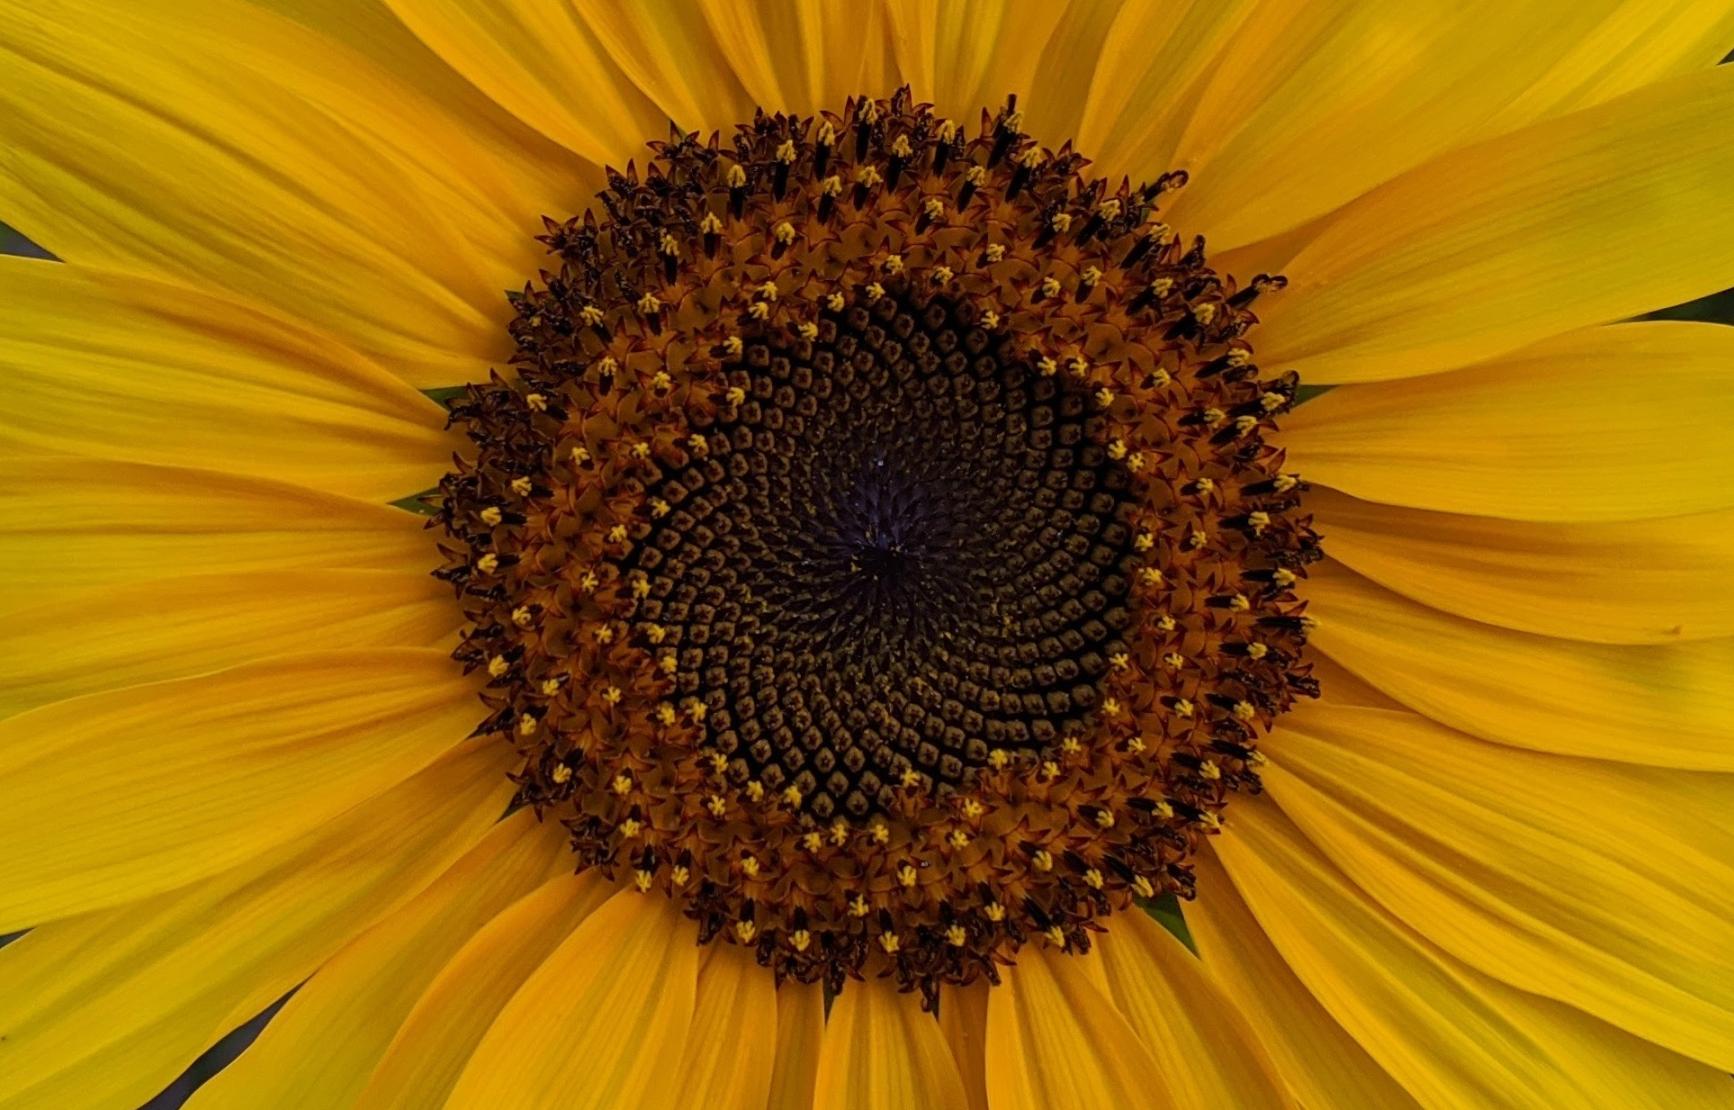 Closeup of a sunflower, showing the arrangement of seeds in the center